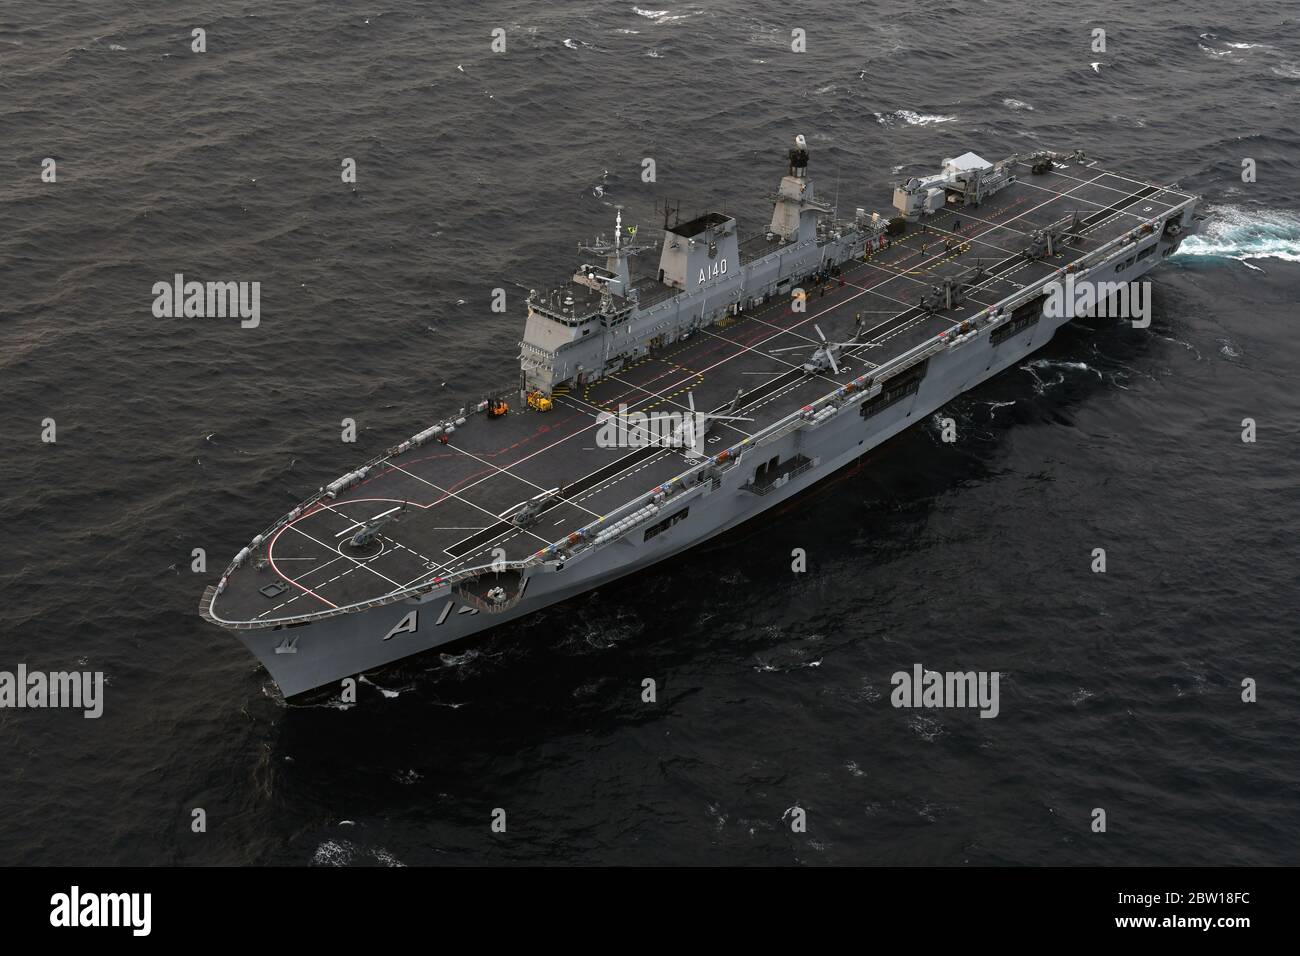 Rio de Janeiro, Brazil, September 29, 2018. Carrier Helicopters A140 Atlântico of the Brazilian Navy, sailing on the coast of Brazil. Stock Photo